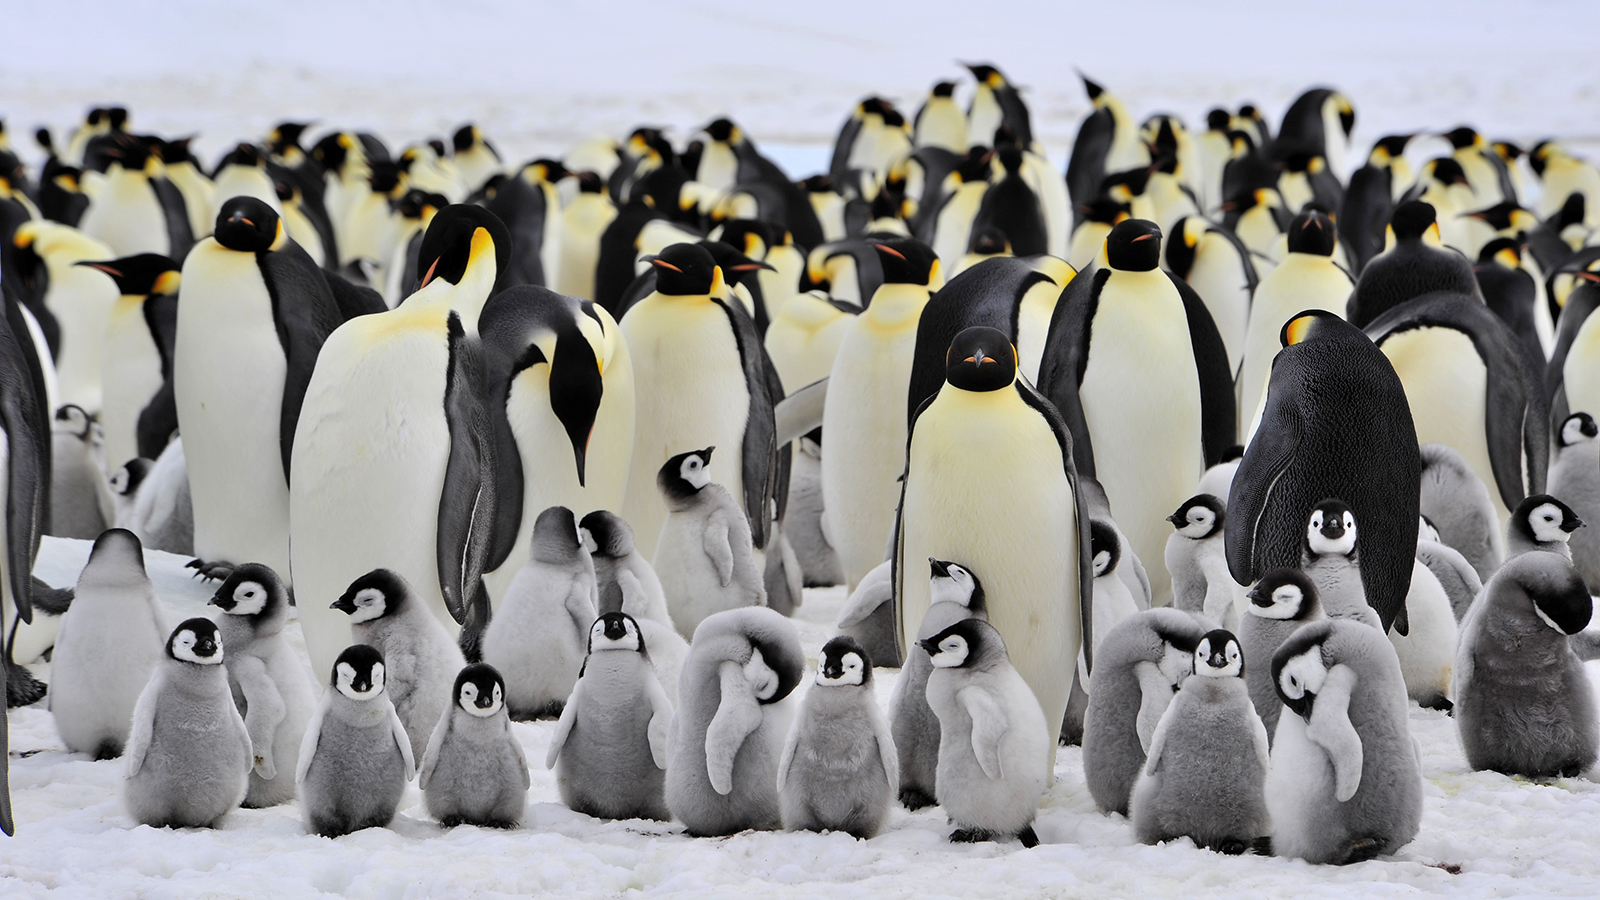 If You Score 14/15 on This Riddle Quiz, You’re Smarter Than the Average Person Emperor penguins